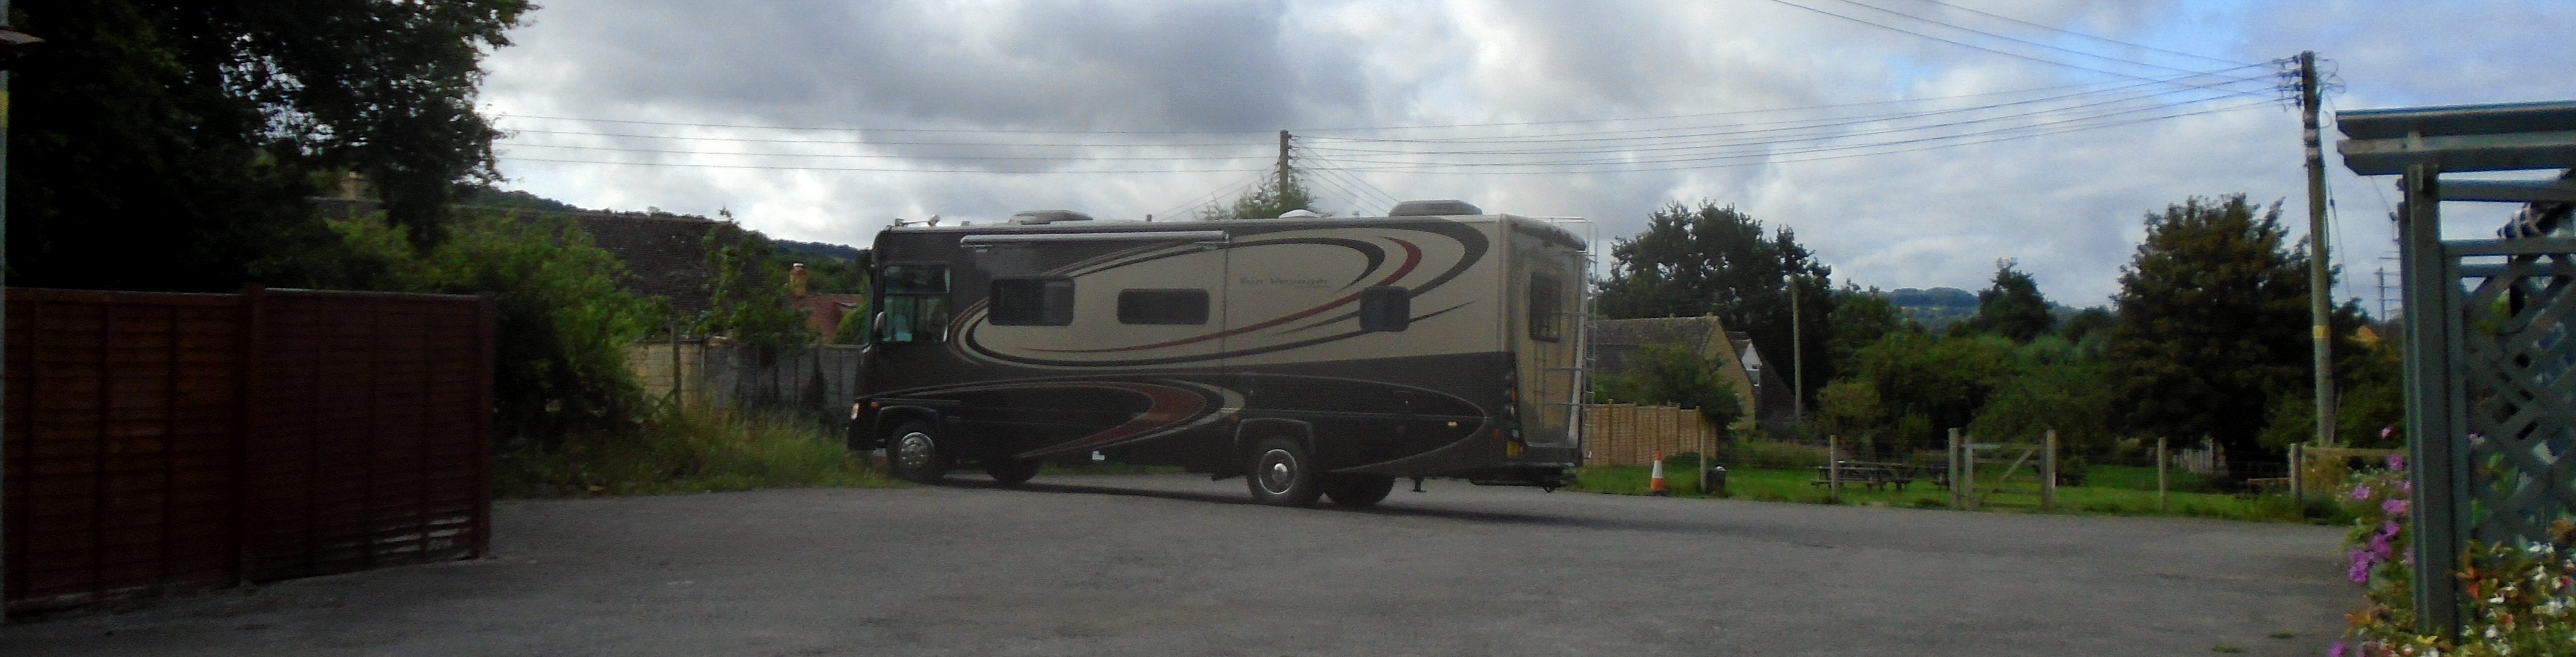 Camper at The New Inn Willersey in 2021